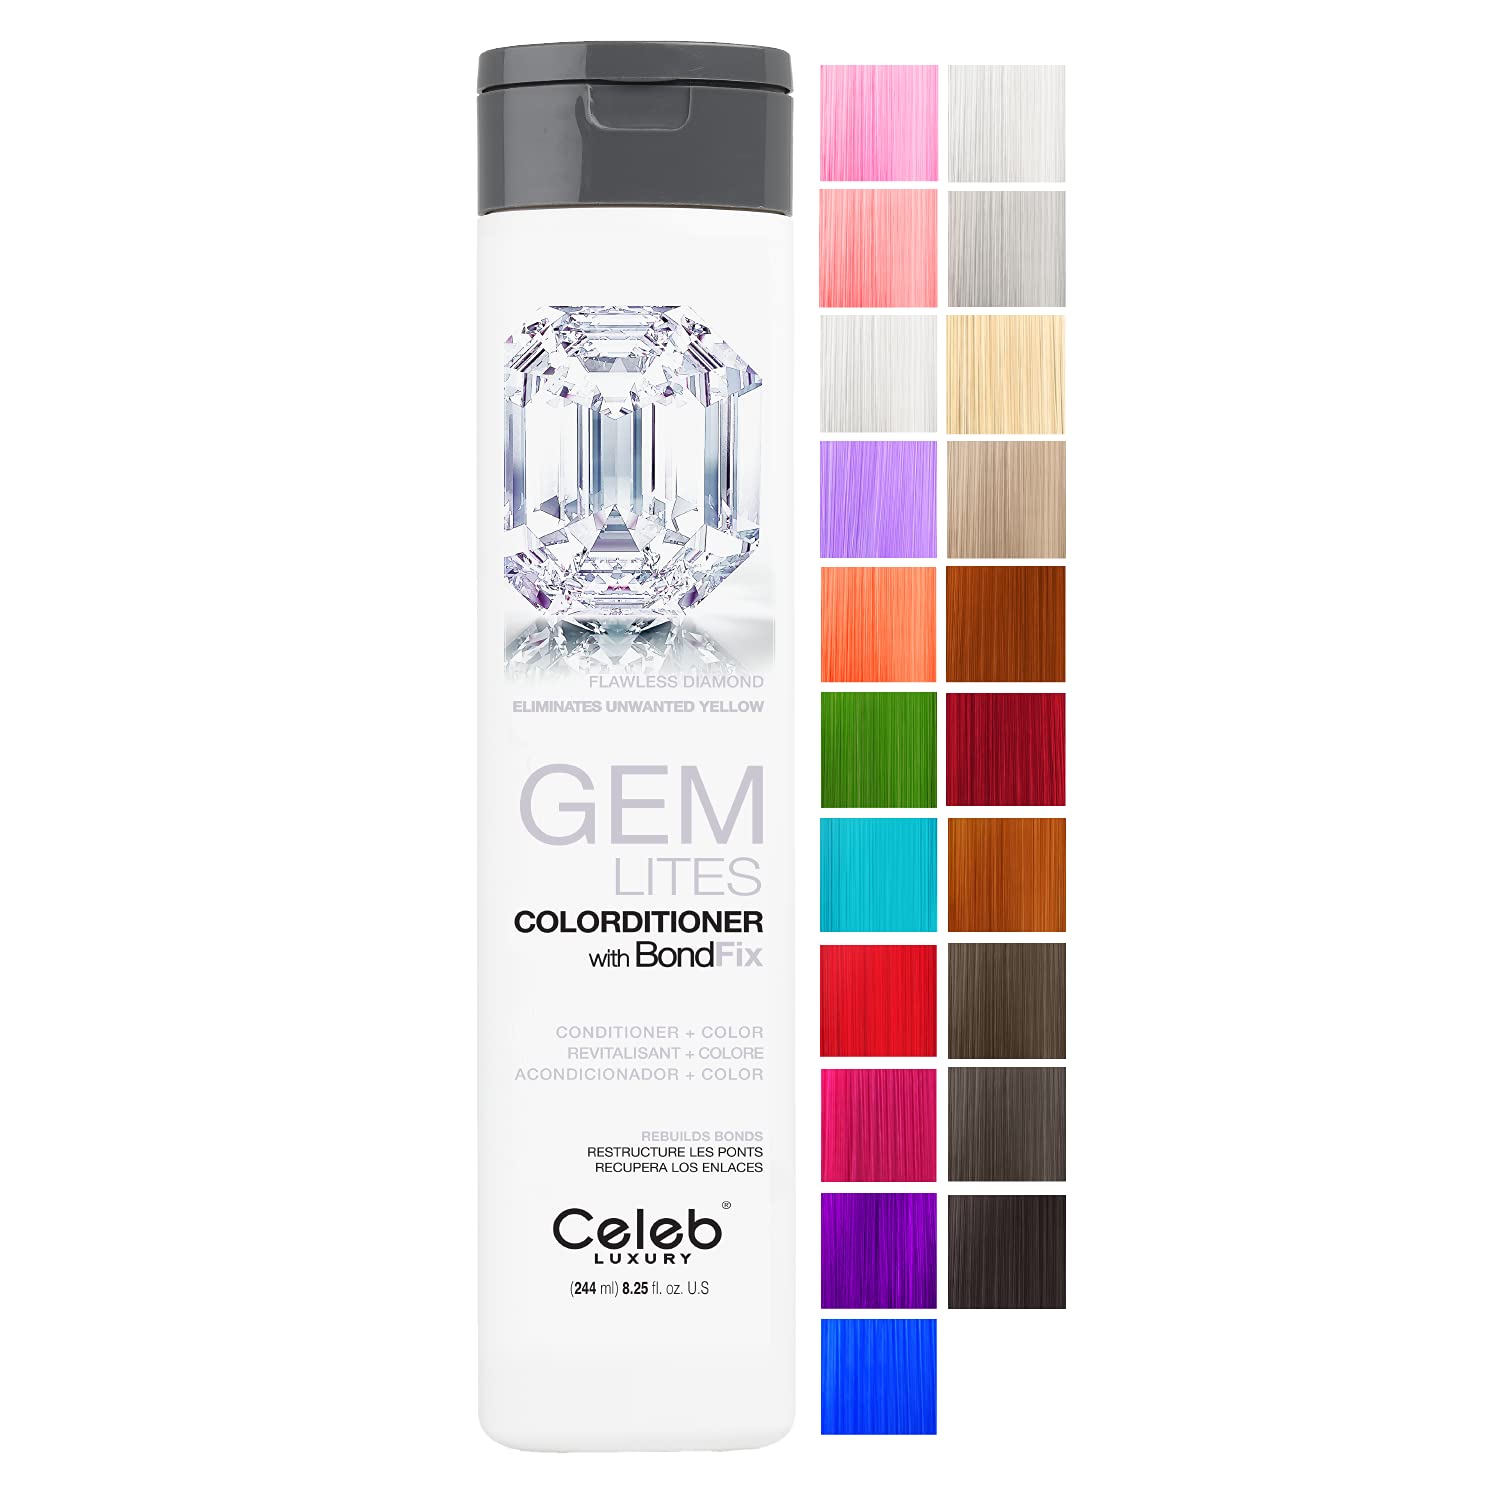 Celeb Luxury Intense Color Depositing Colorconditioner Conditioner + BondFix Bond Rebuilder, Vegan, Sustainably Sourced Plant-Based, Semi-Permanent, Viral and Gem Lites Colorconditioners